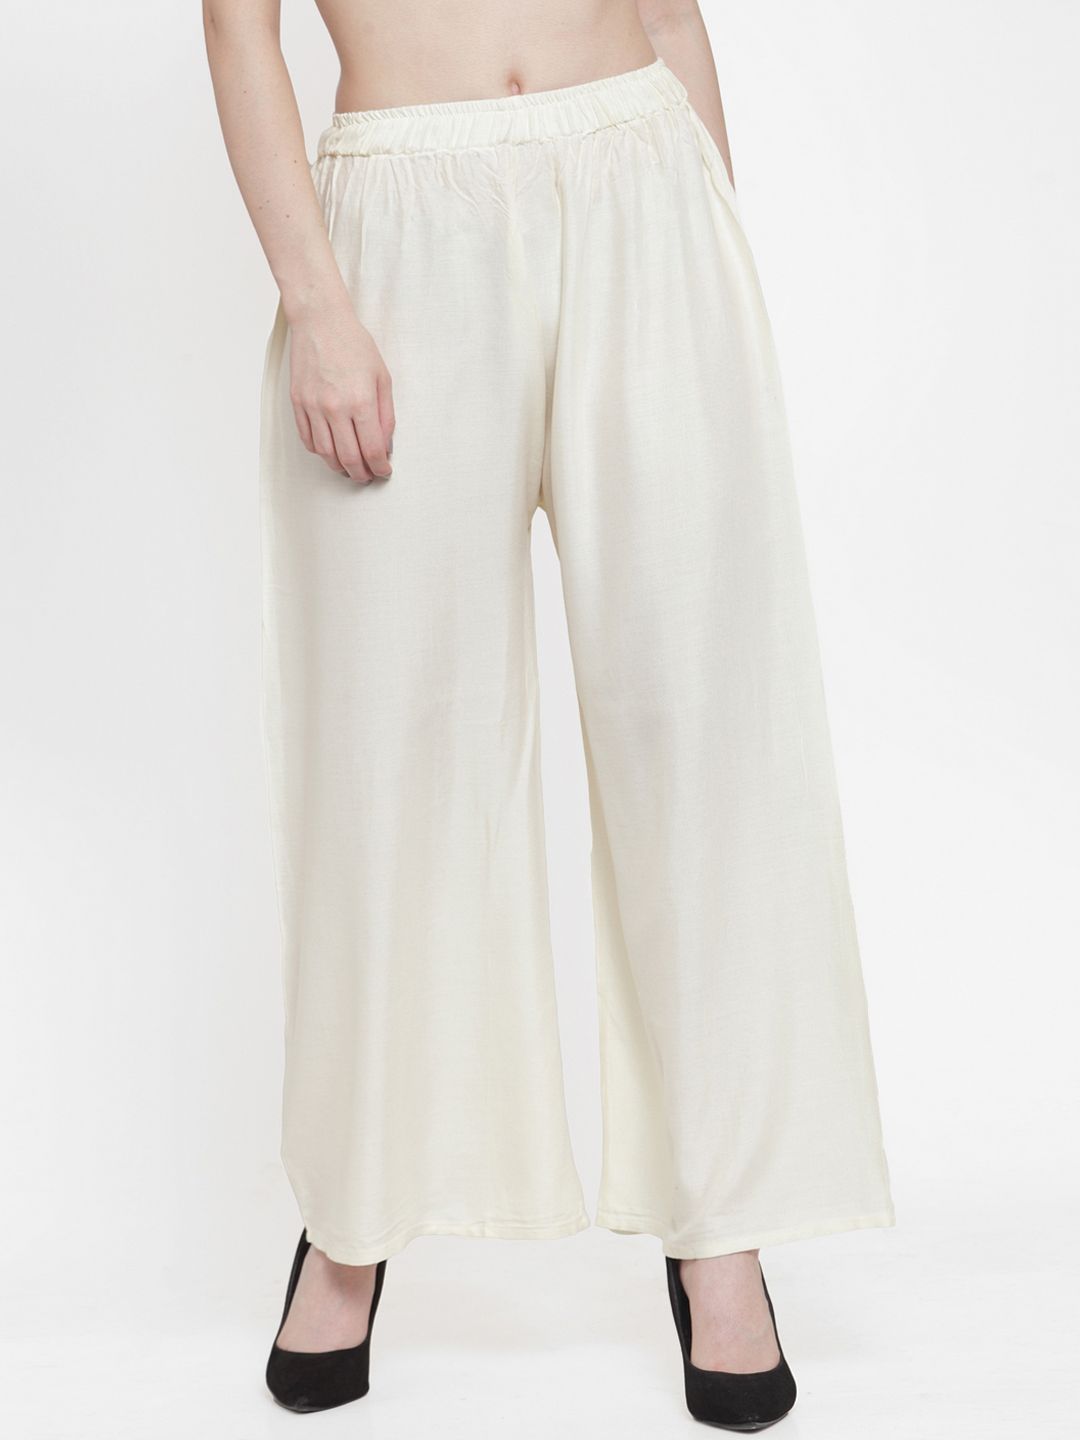 TAG 7 Women Off-White Solid Flared Palazzos Price in India